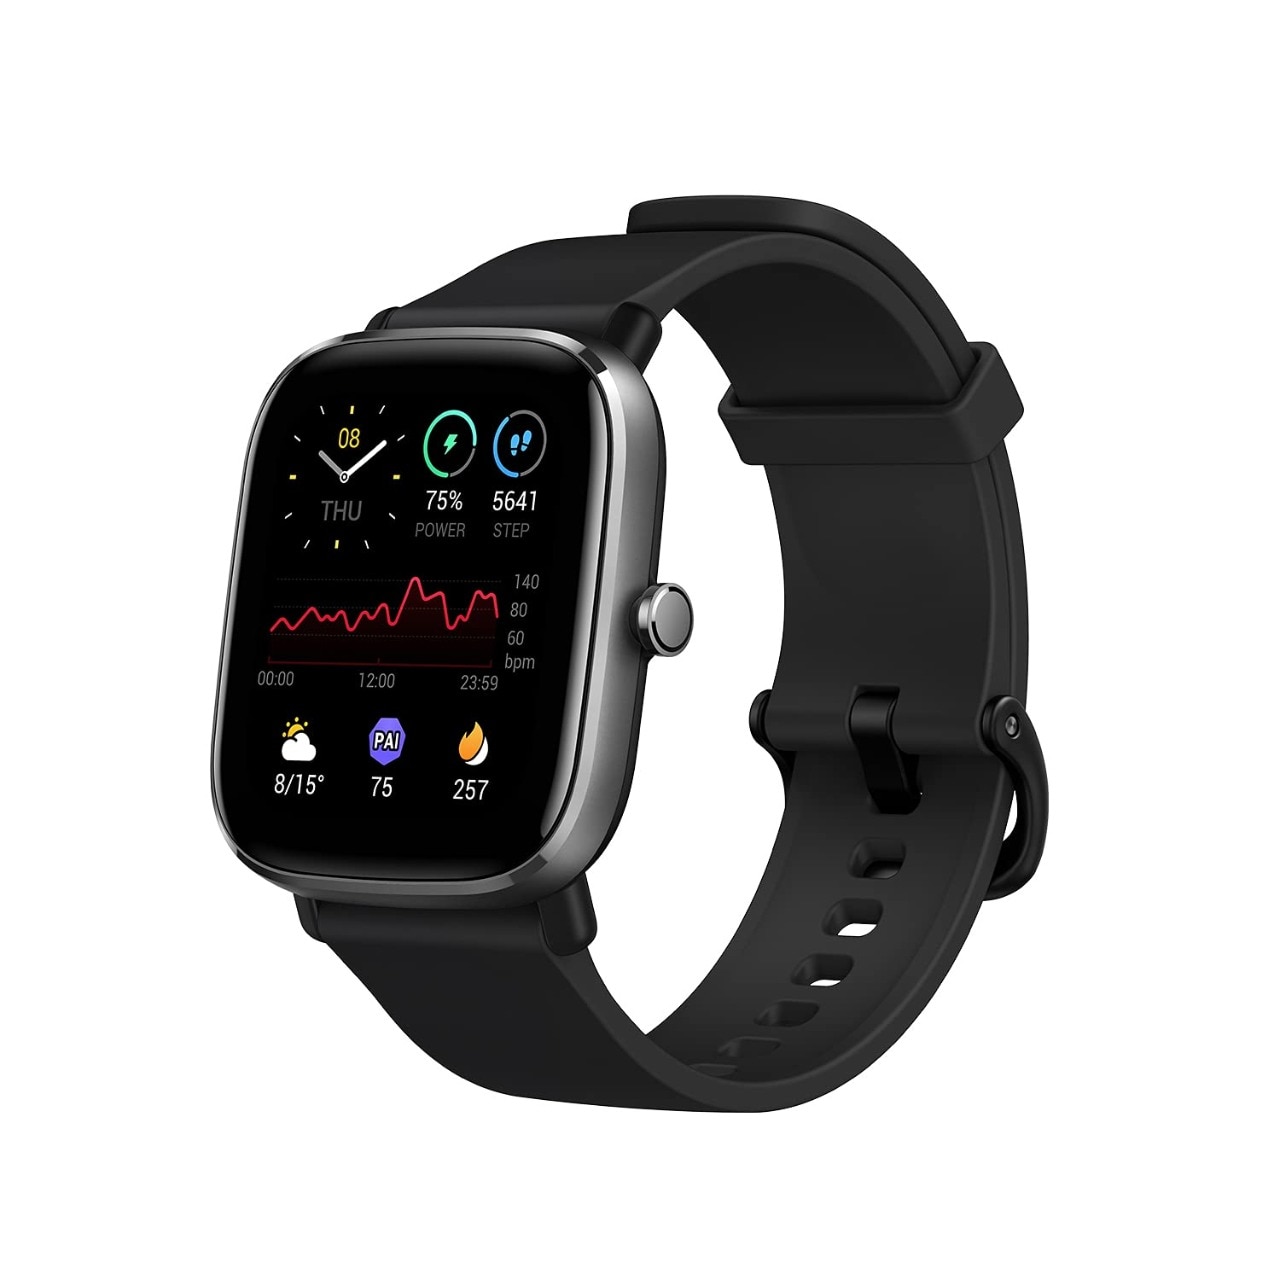 Amazon Festival Sale: Know about the best 5 branded fitness and calling watches, the price in Amazon sale starts from just Rs 1500